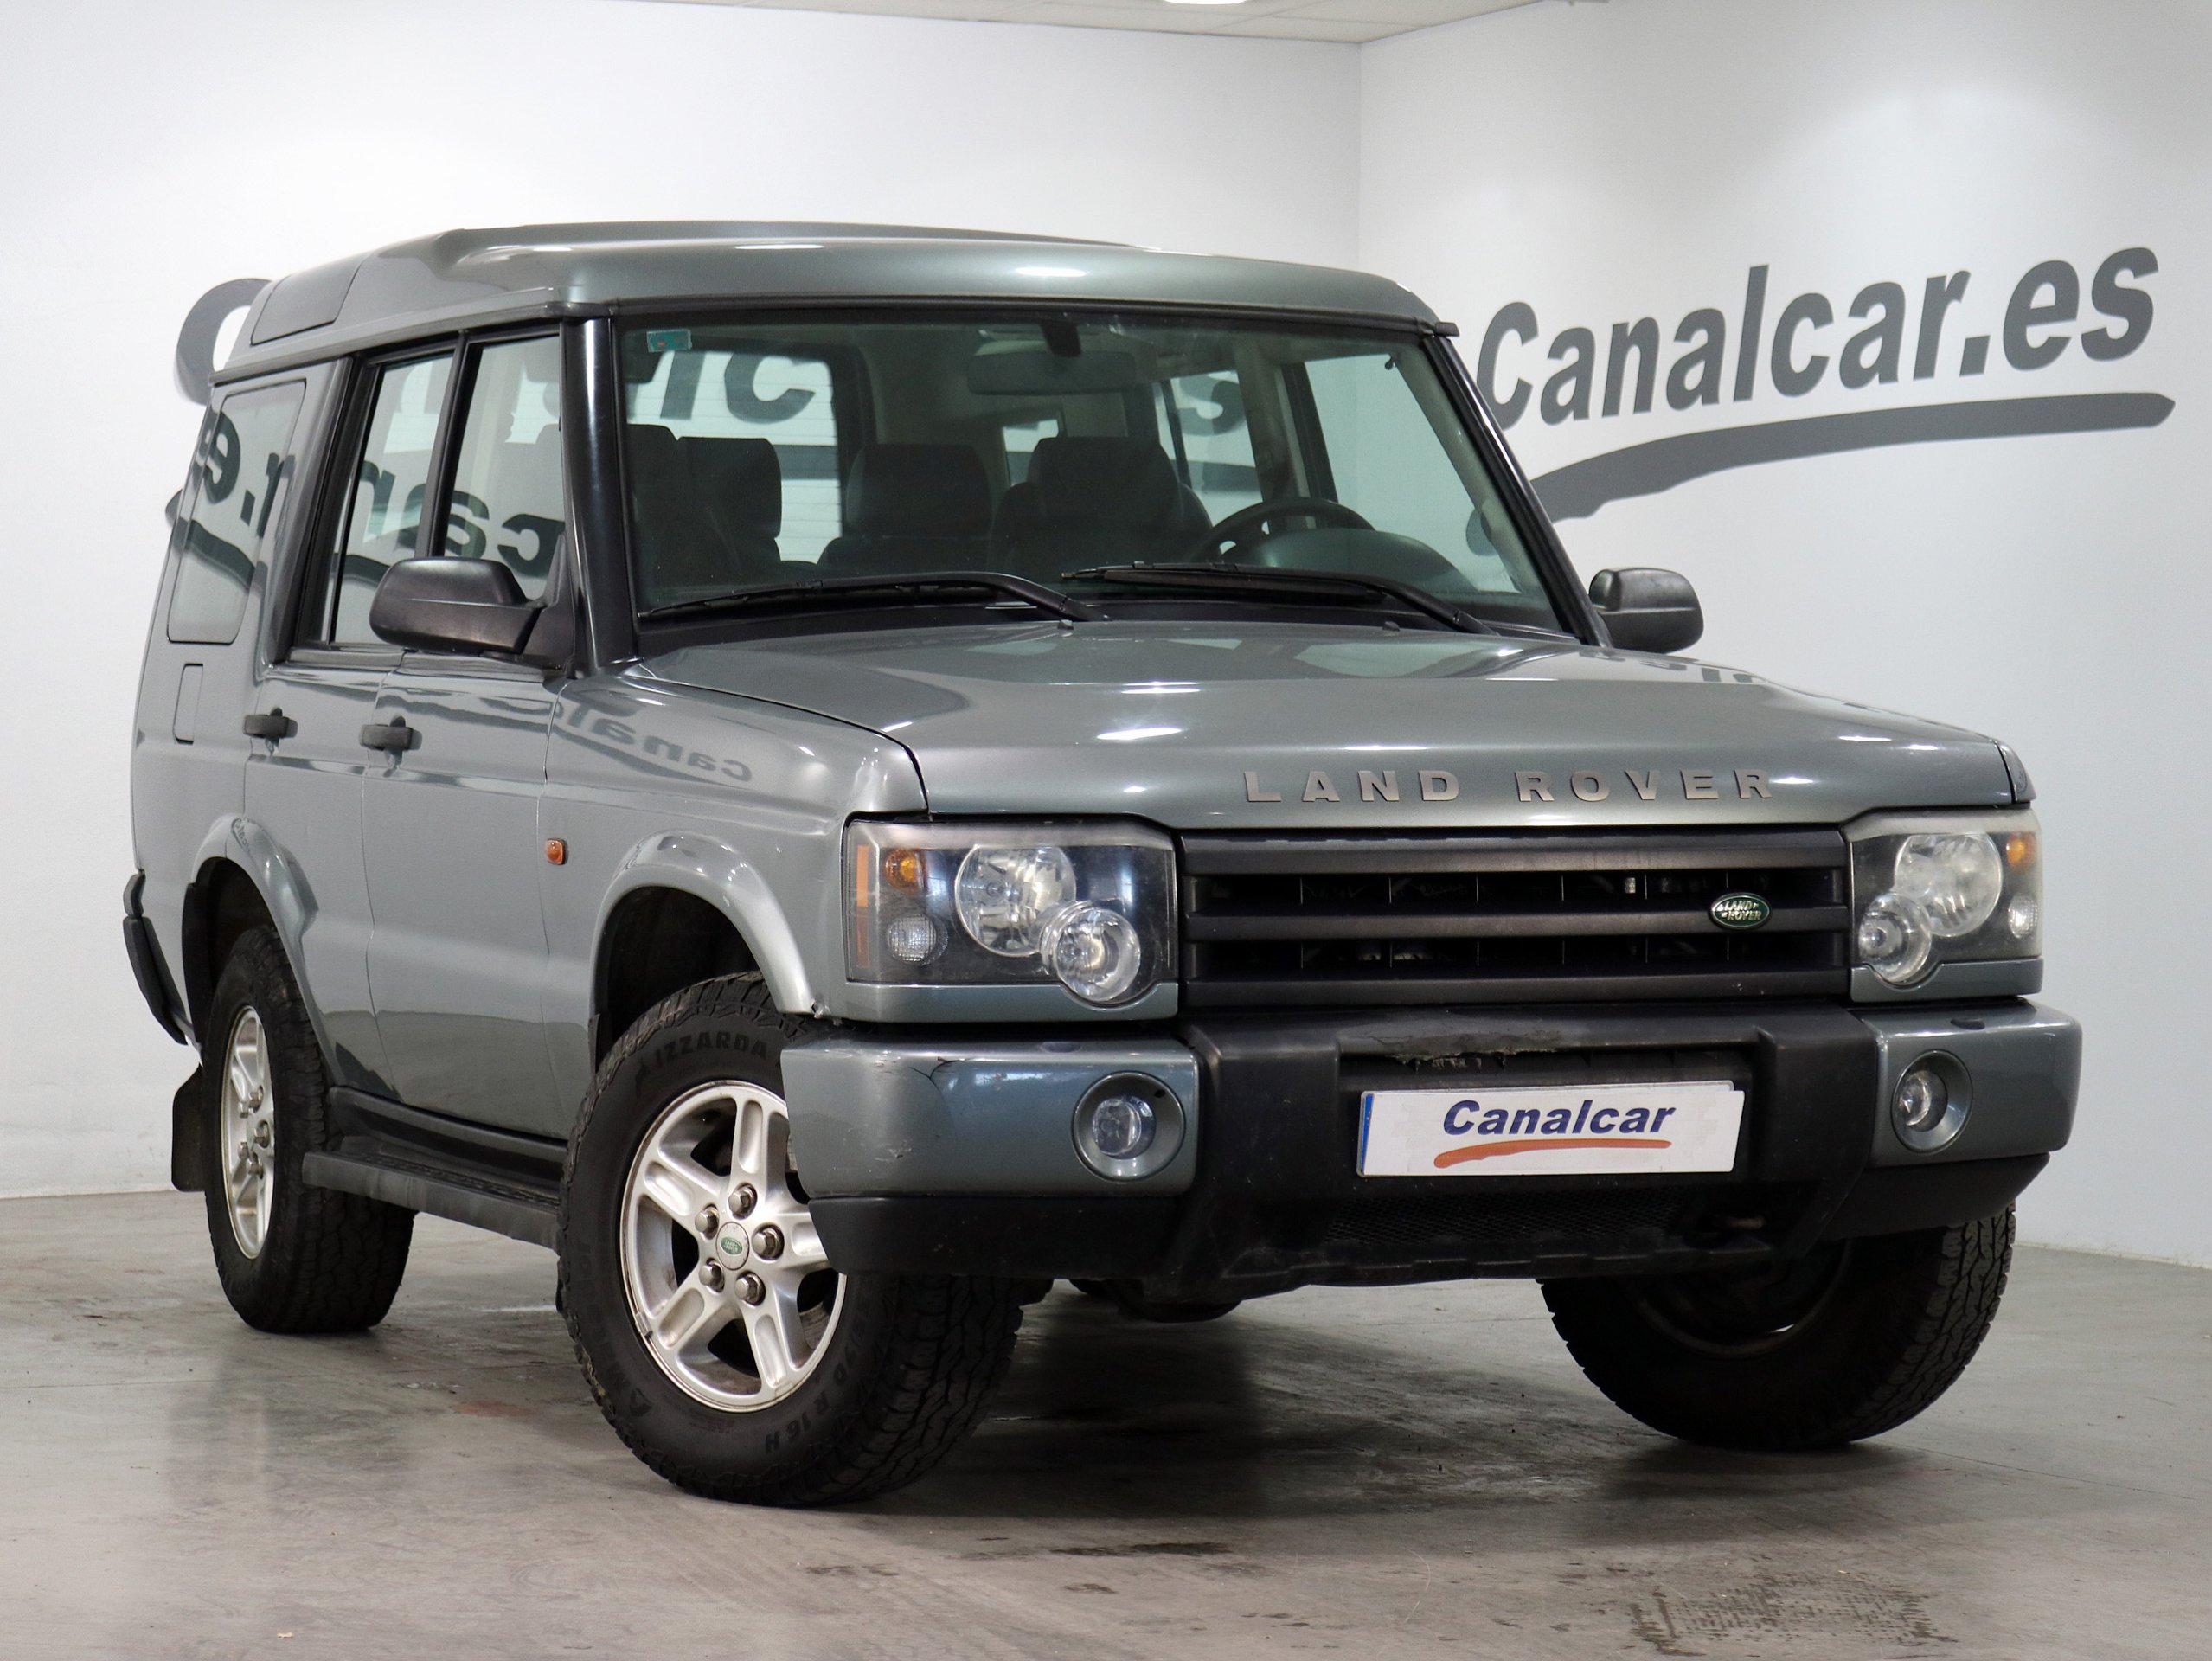 Foto Land Rover Discovery 5